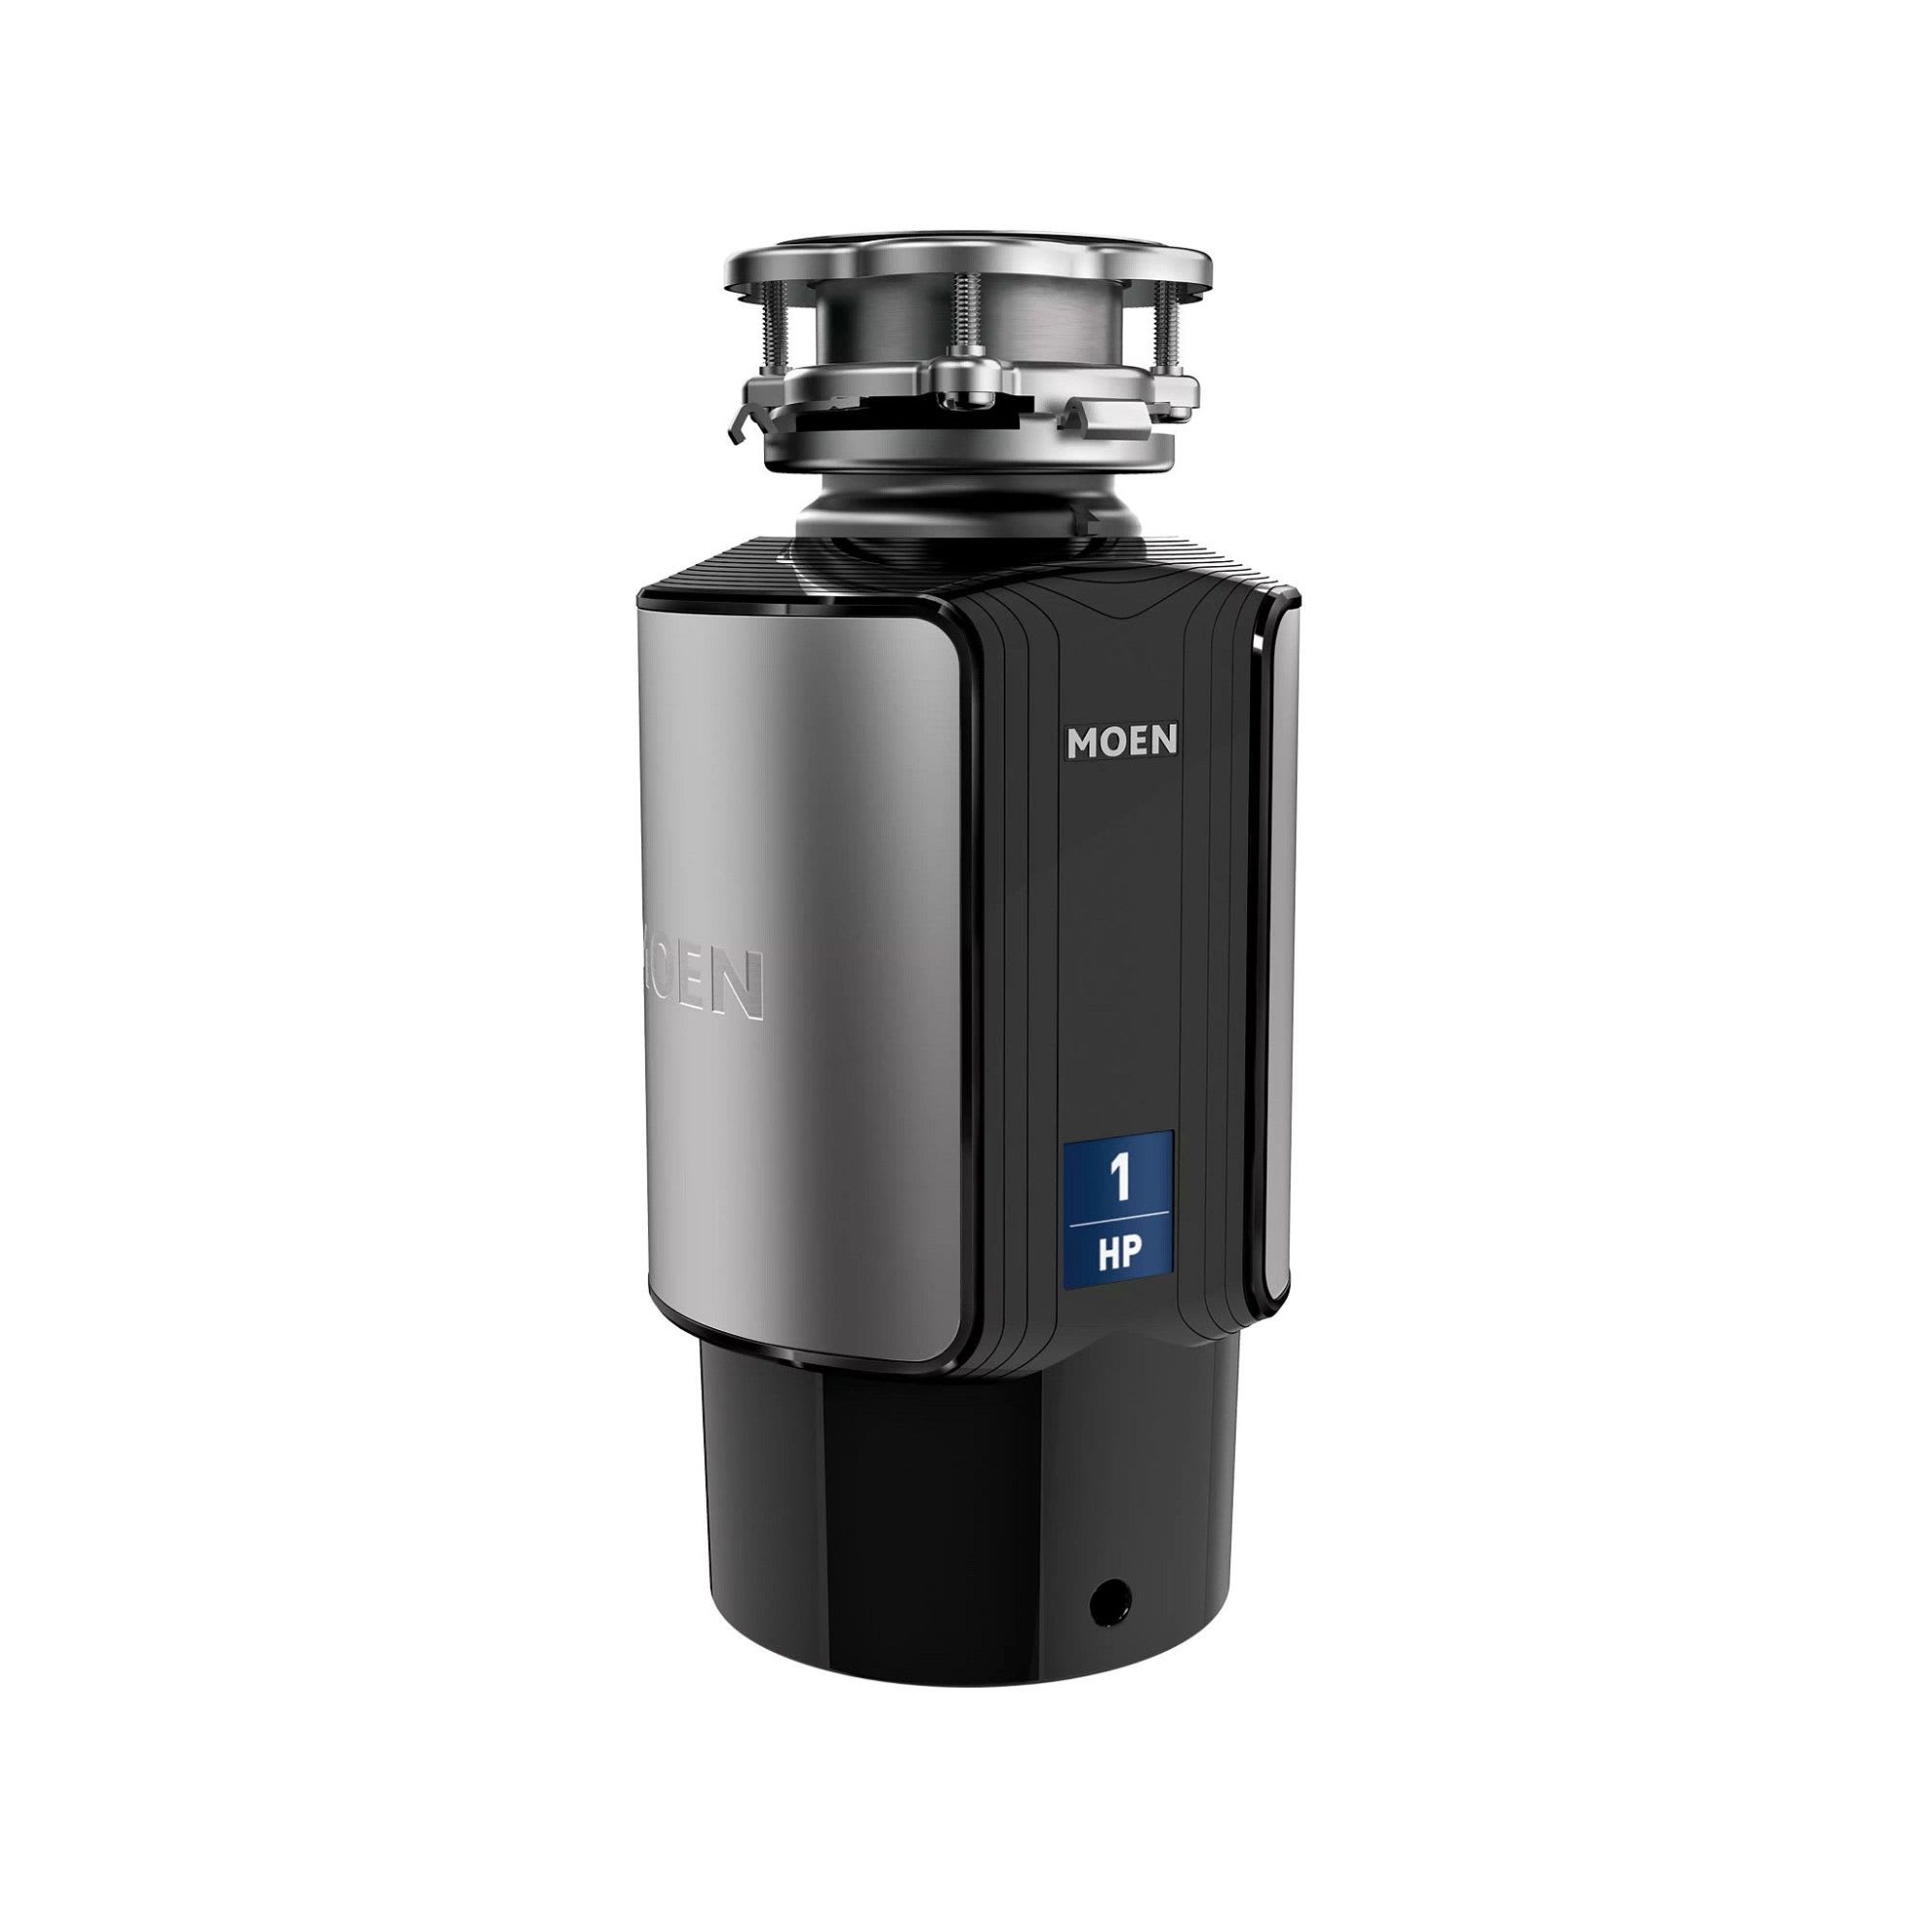 Moen GX100C Stainless Steel GX HP Continuous Garbage Disposal with  SoundSHIELD Technology, Vortex Motor and Power cord included. 